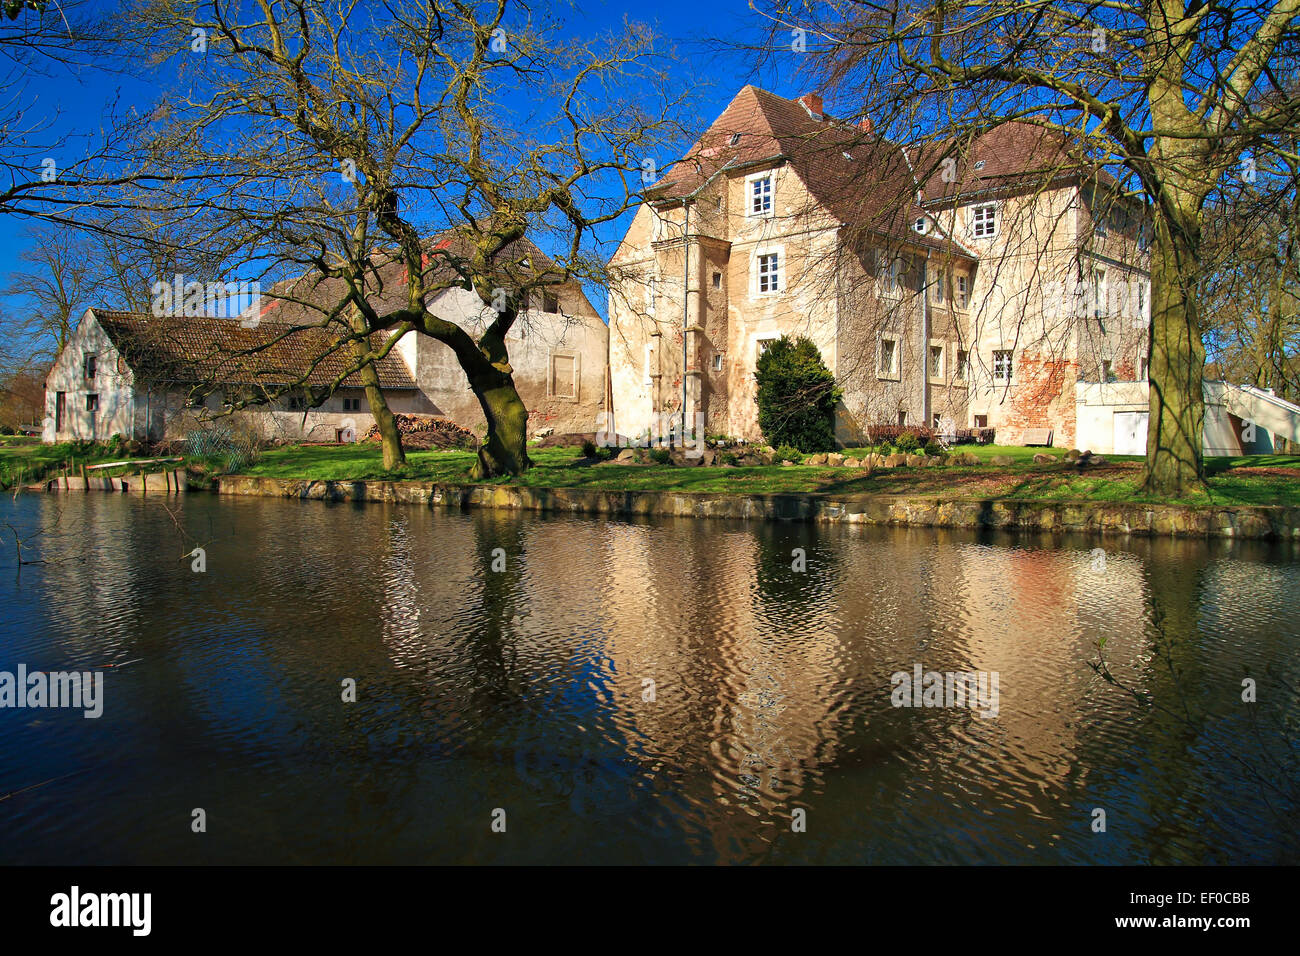 The water castle in Mellenthin. Stock Photo